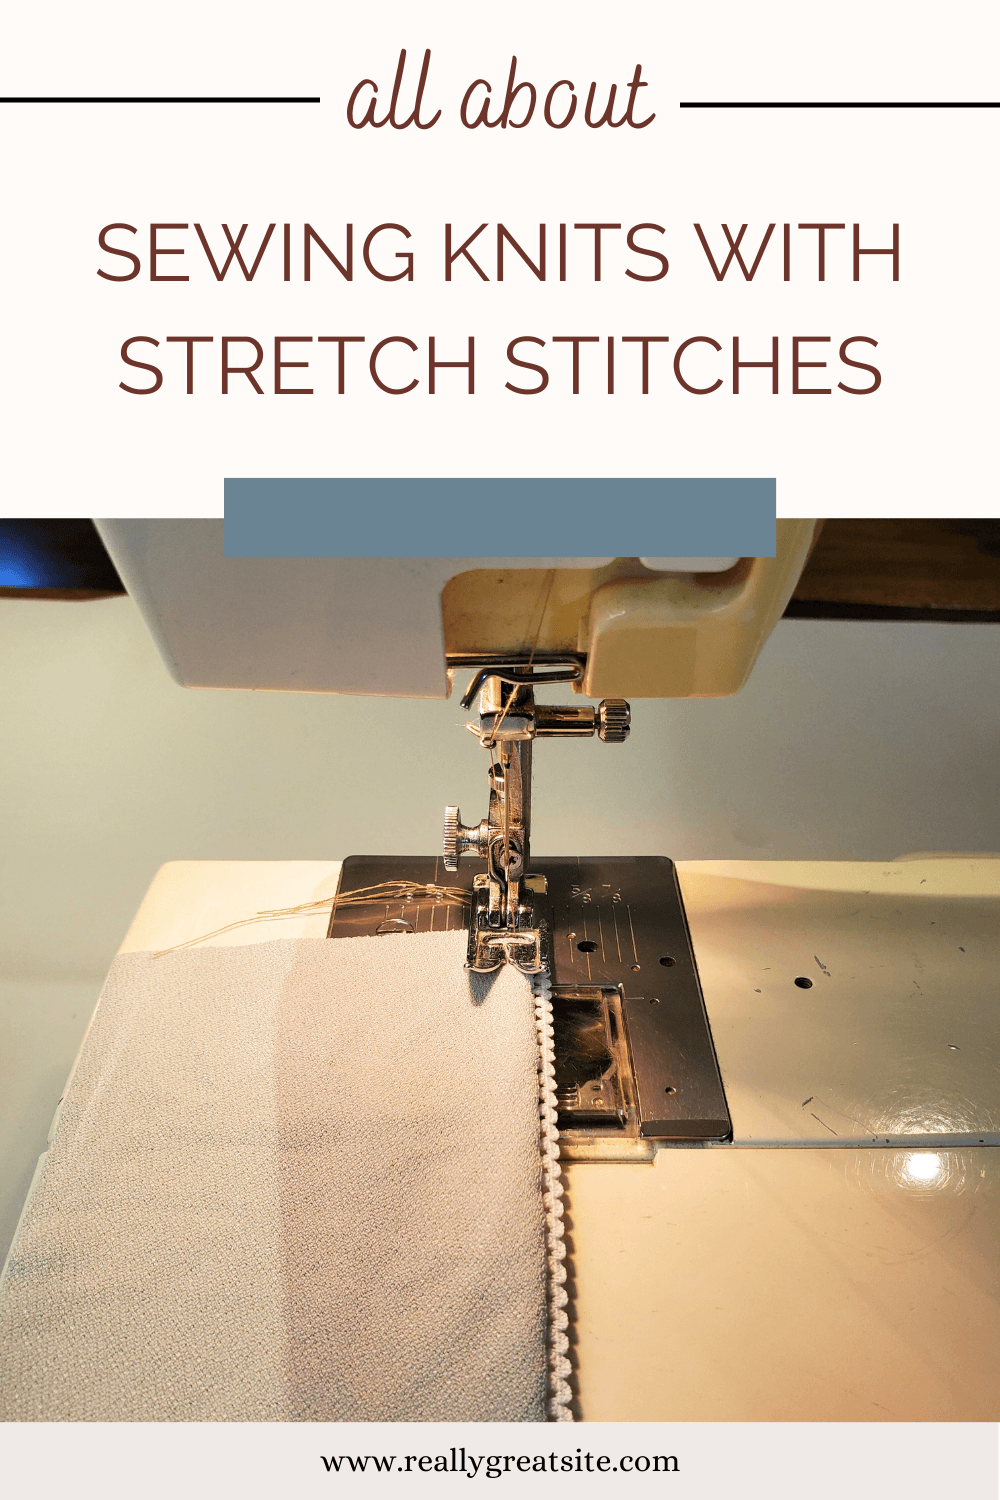 Sewing knits with stretch stitches